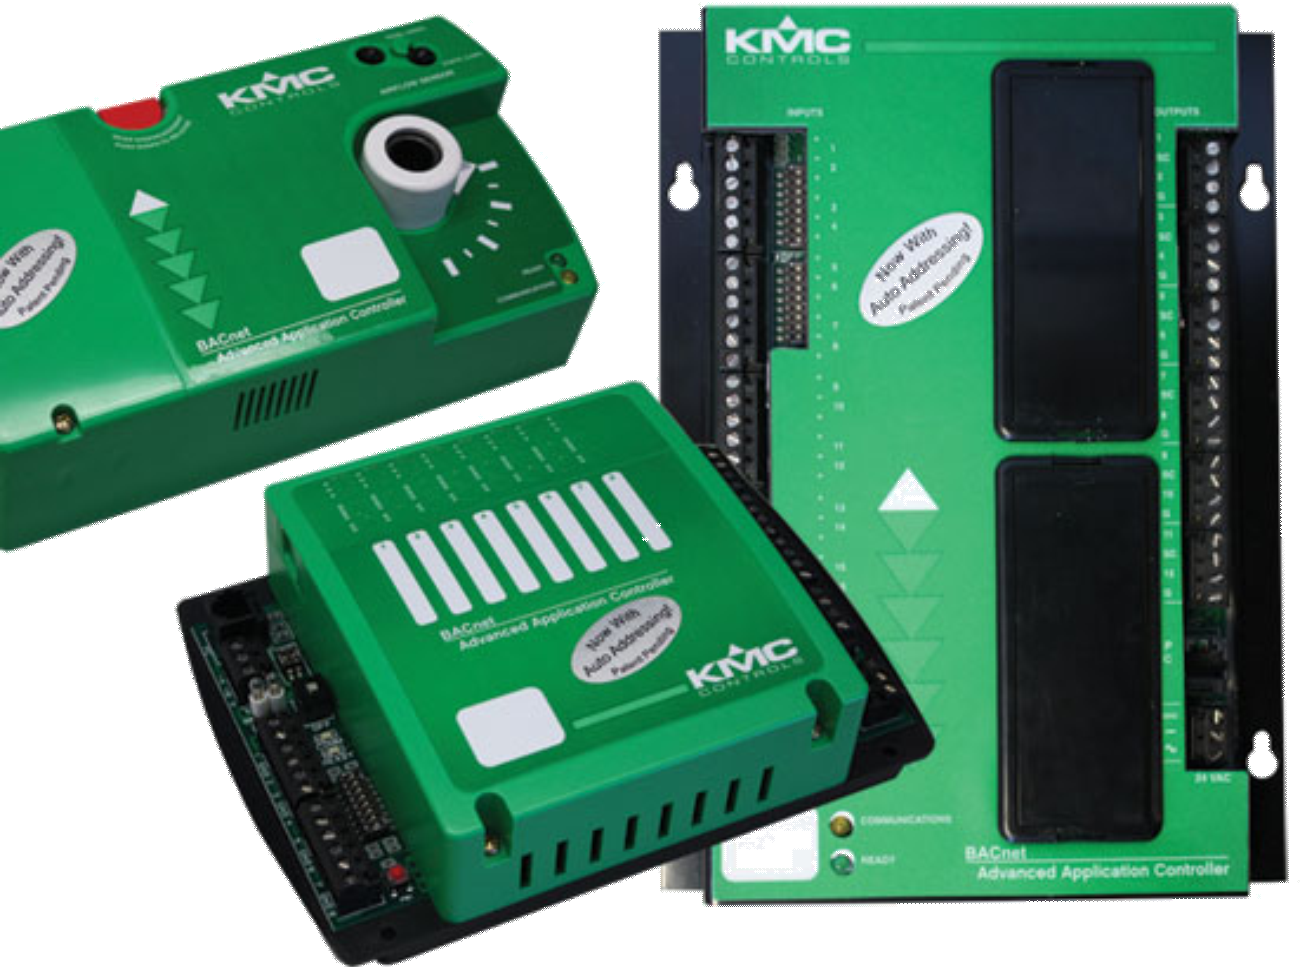 Building Automation and Controls with Lar-Mex,Airon and KMC Controls